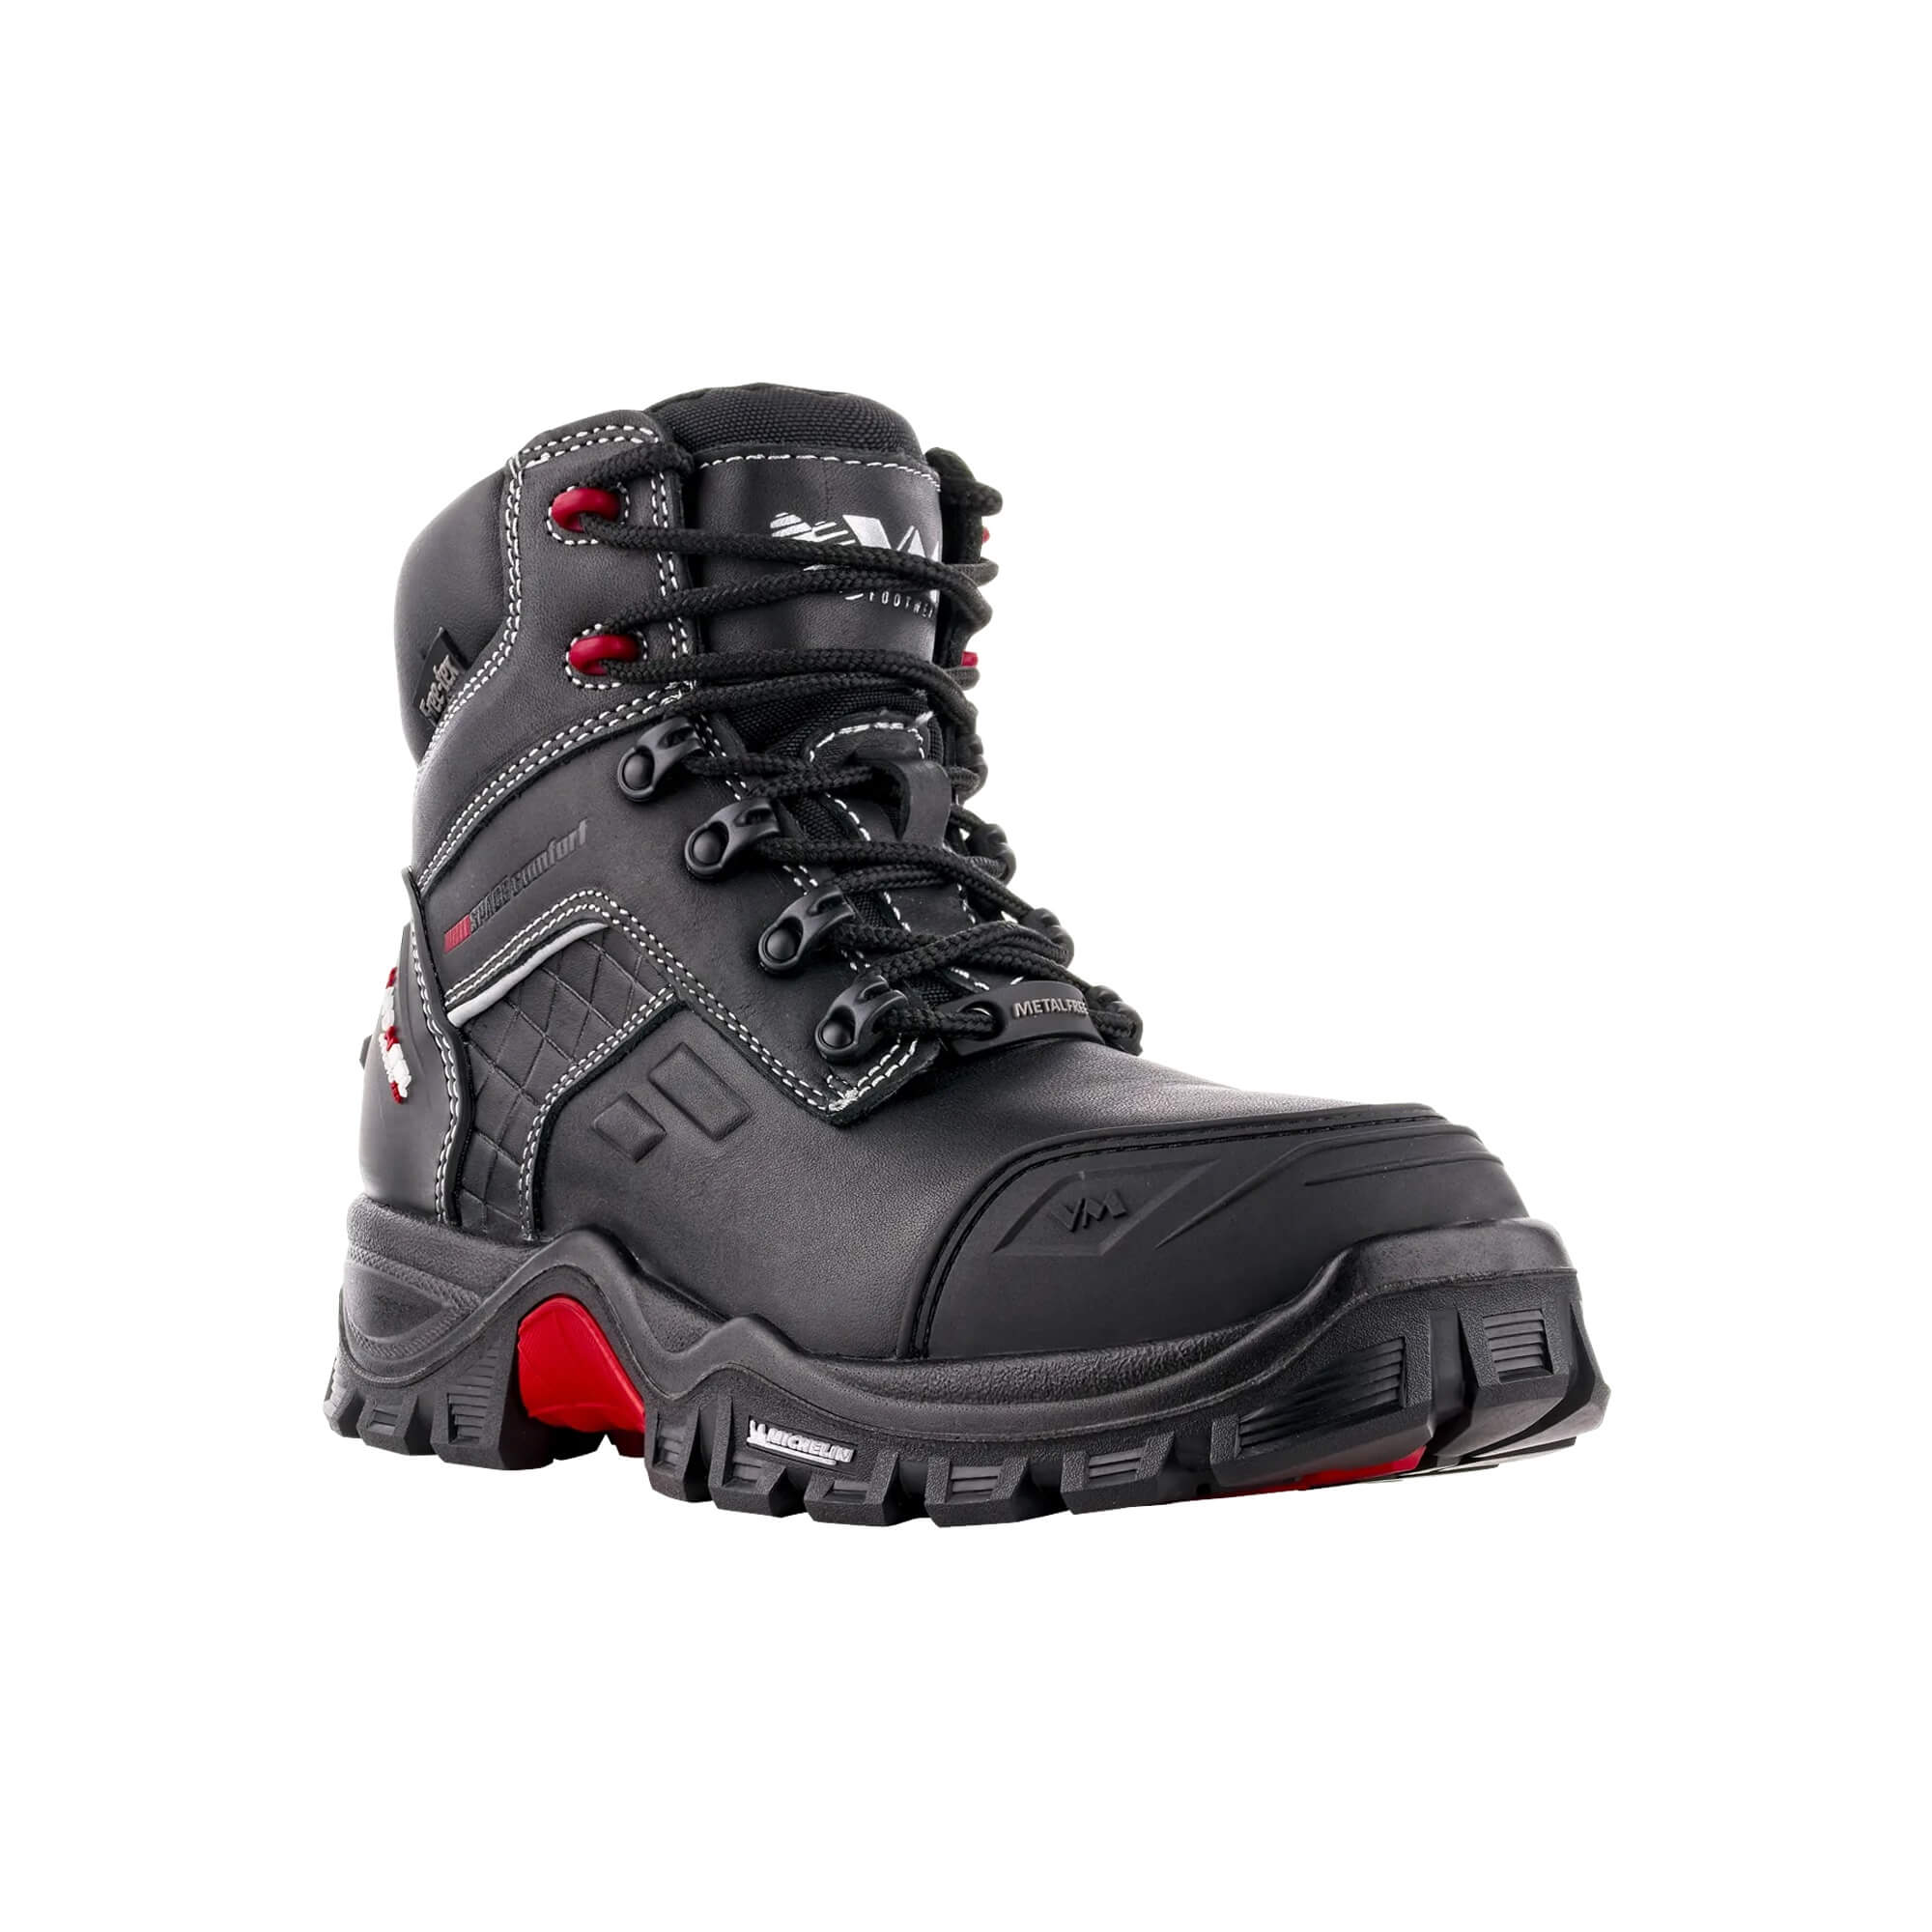 Rockford ankle safety shoes